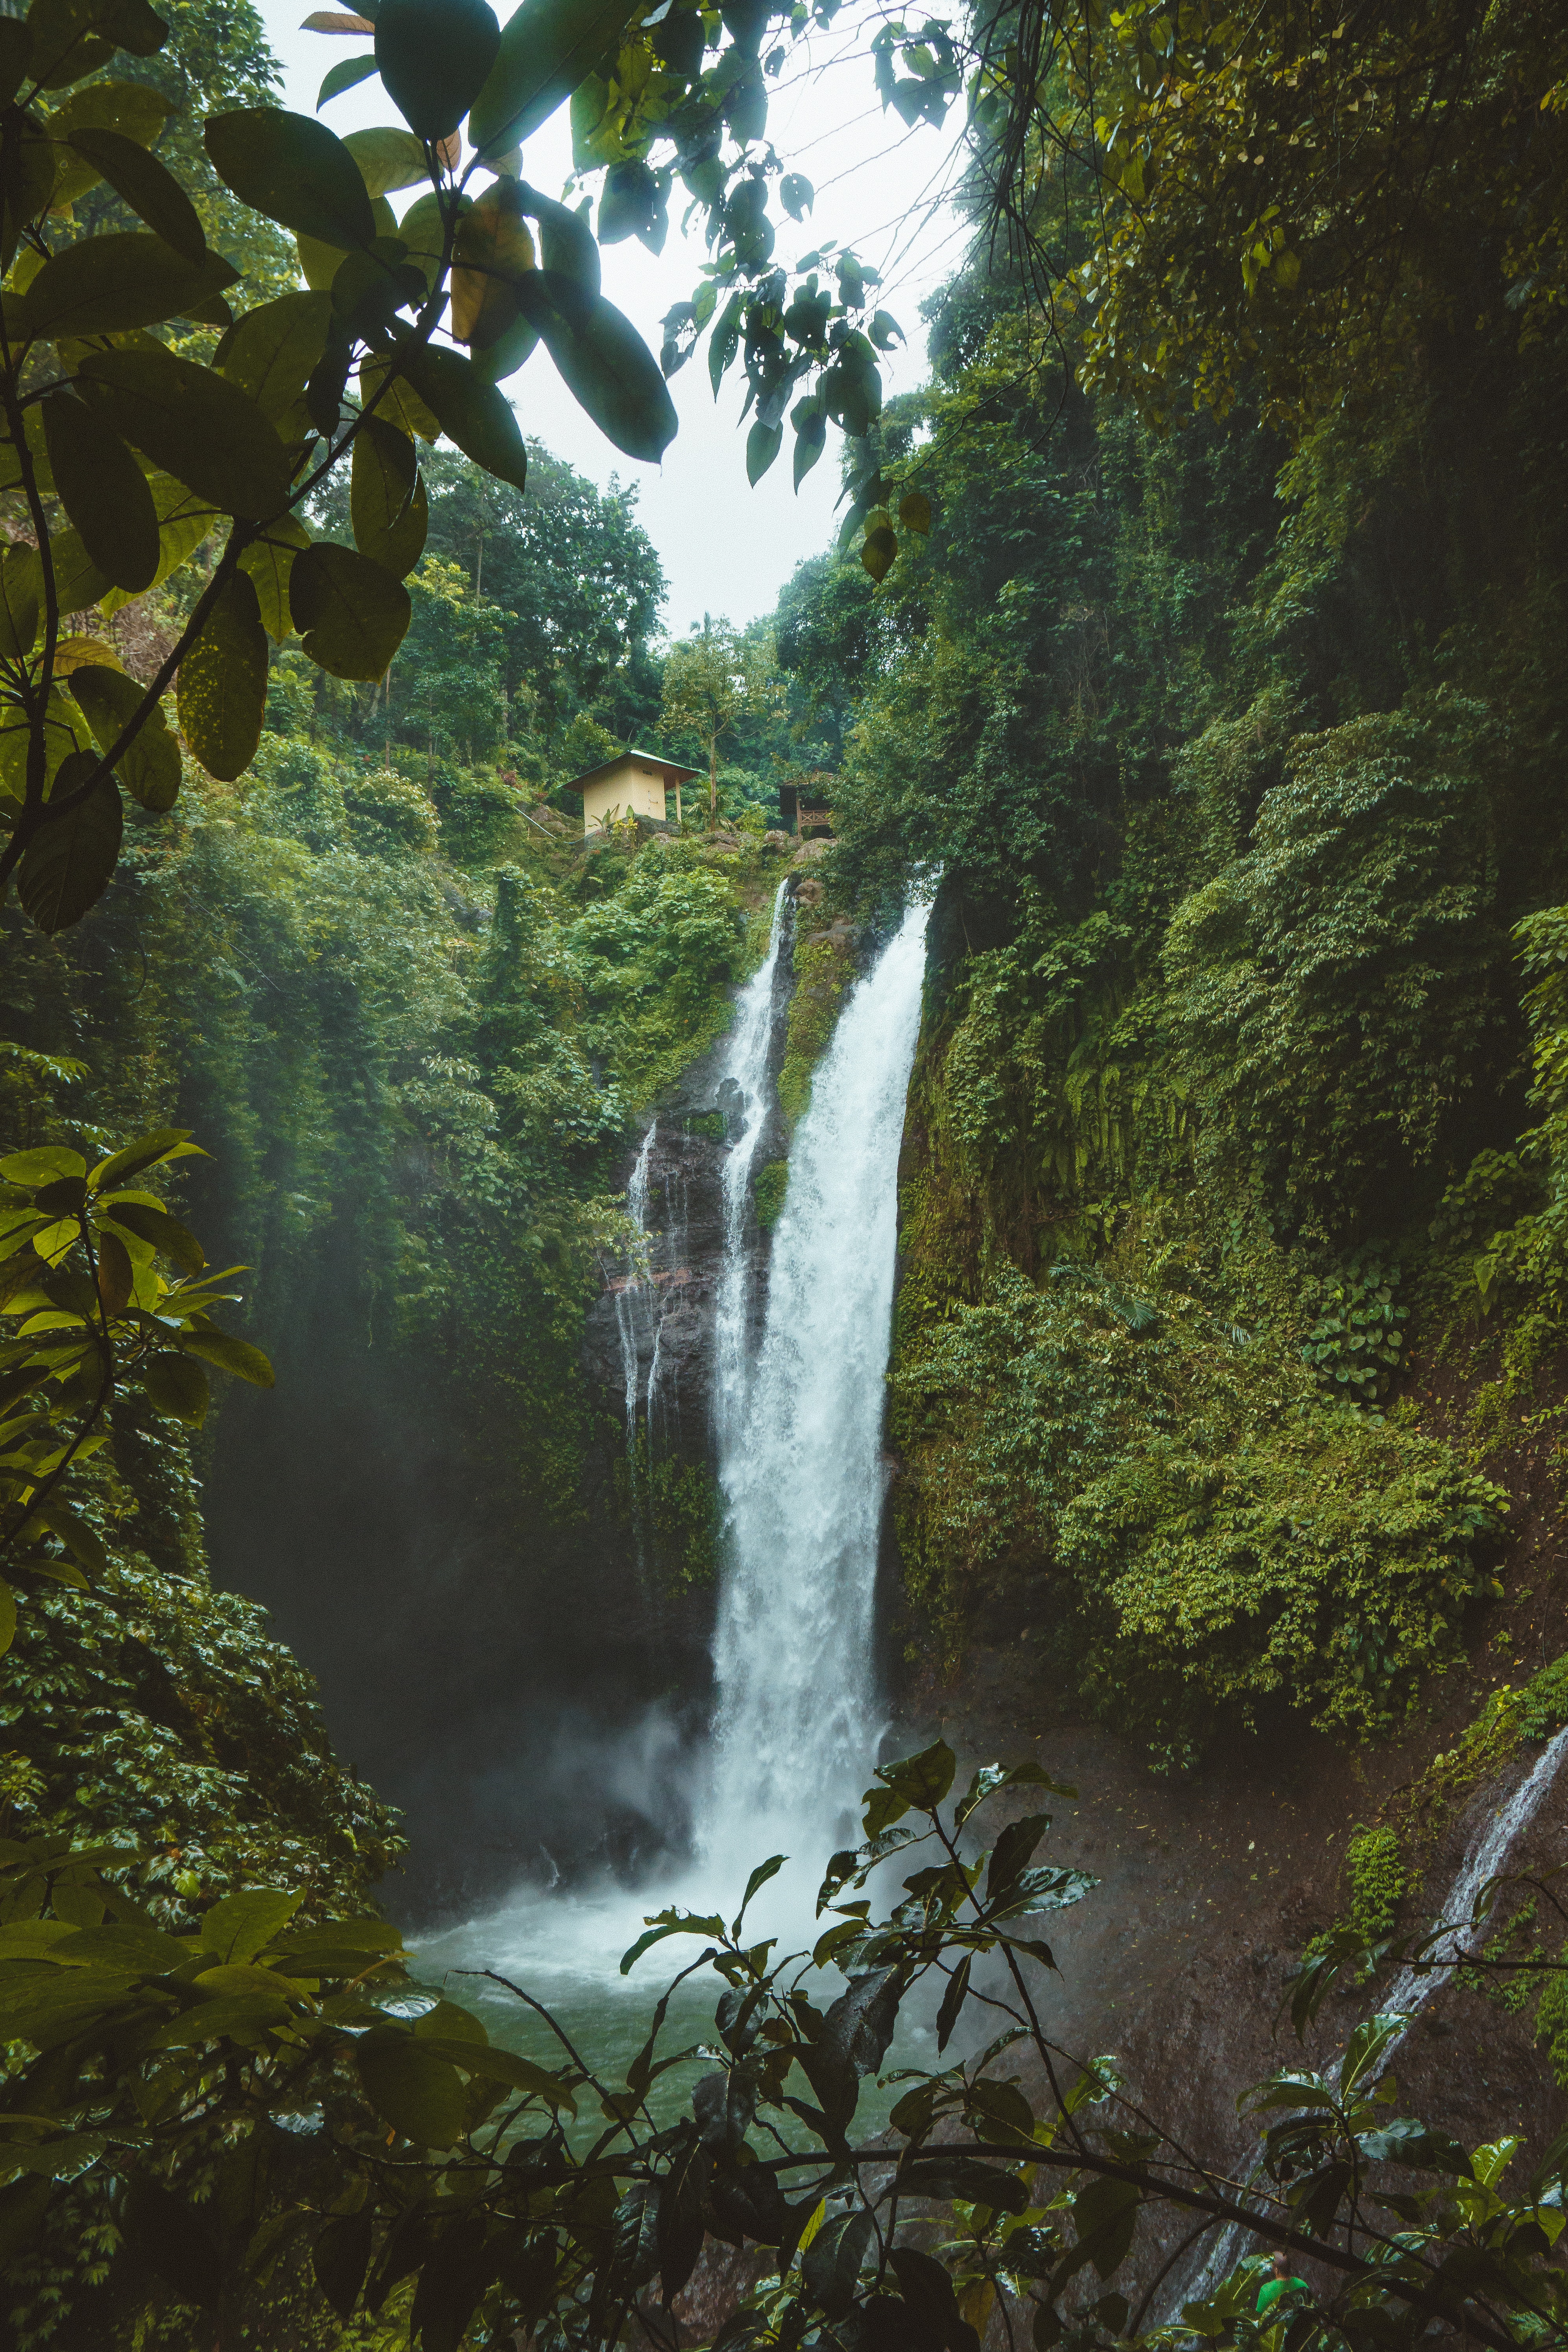 Landscape Photography of Waterfalls Surrounded by Green Leafed Plants, Adventure, Outdoors, Waterfall, Water, HQ Photo